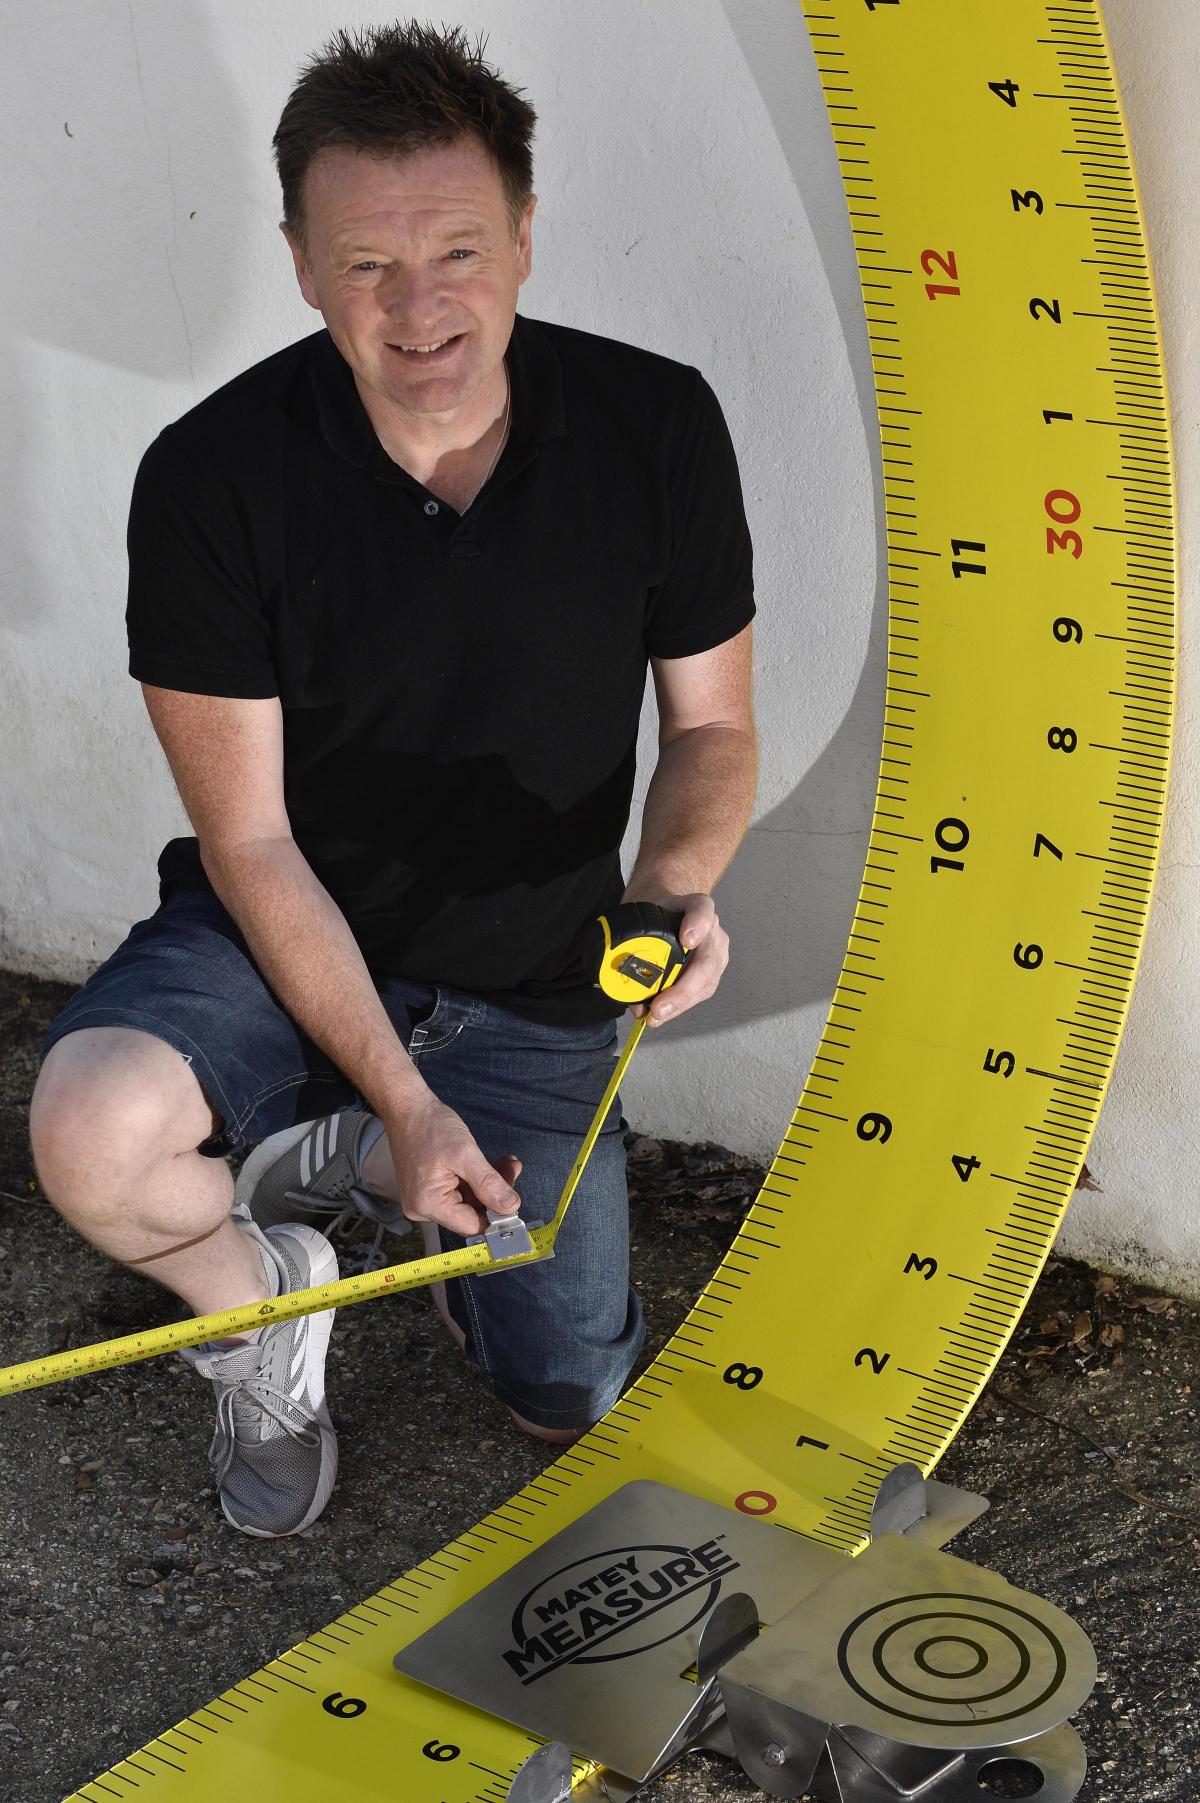 Steve measures up with invention